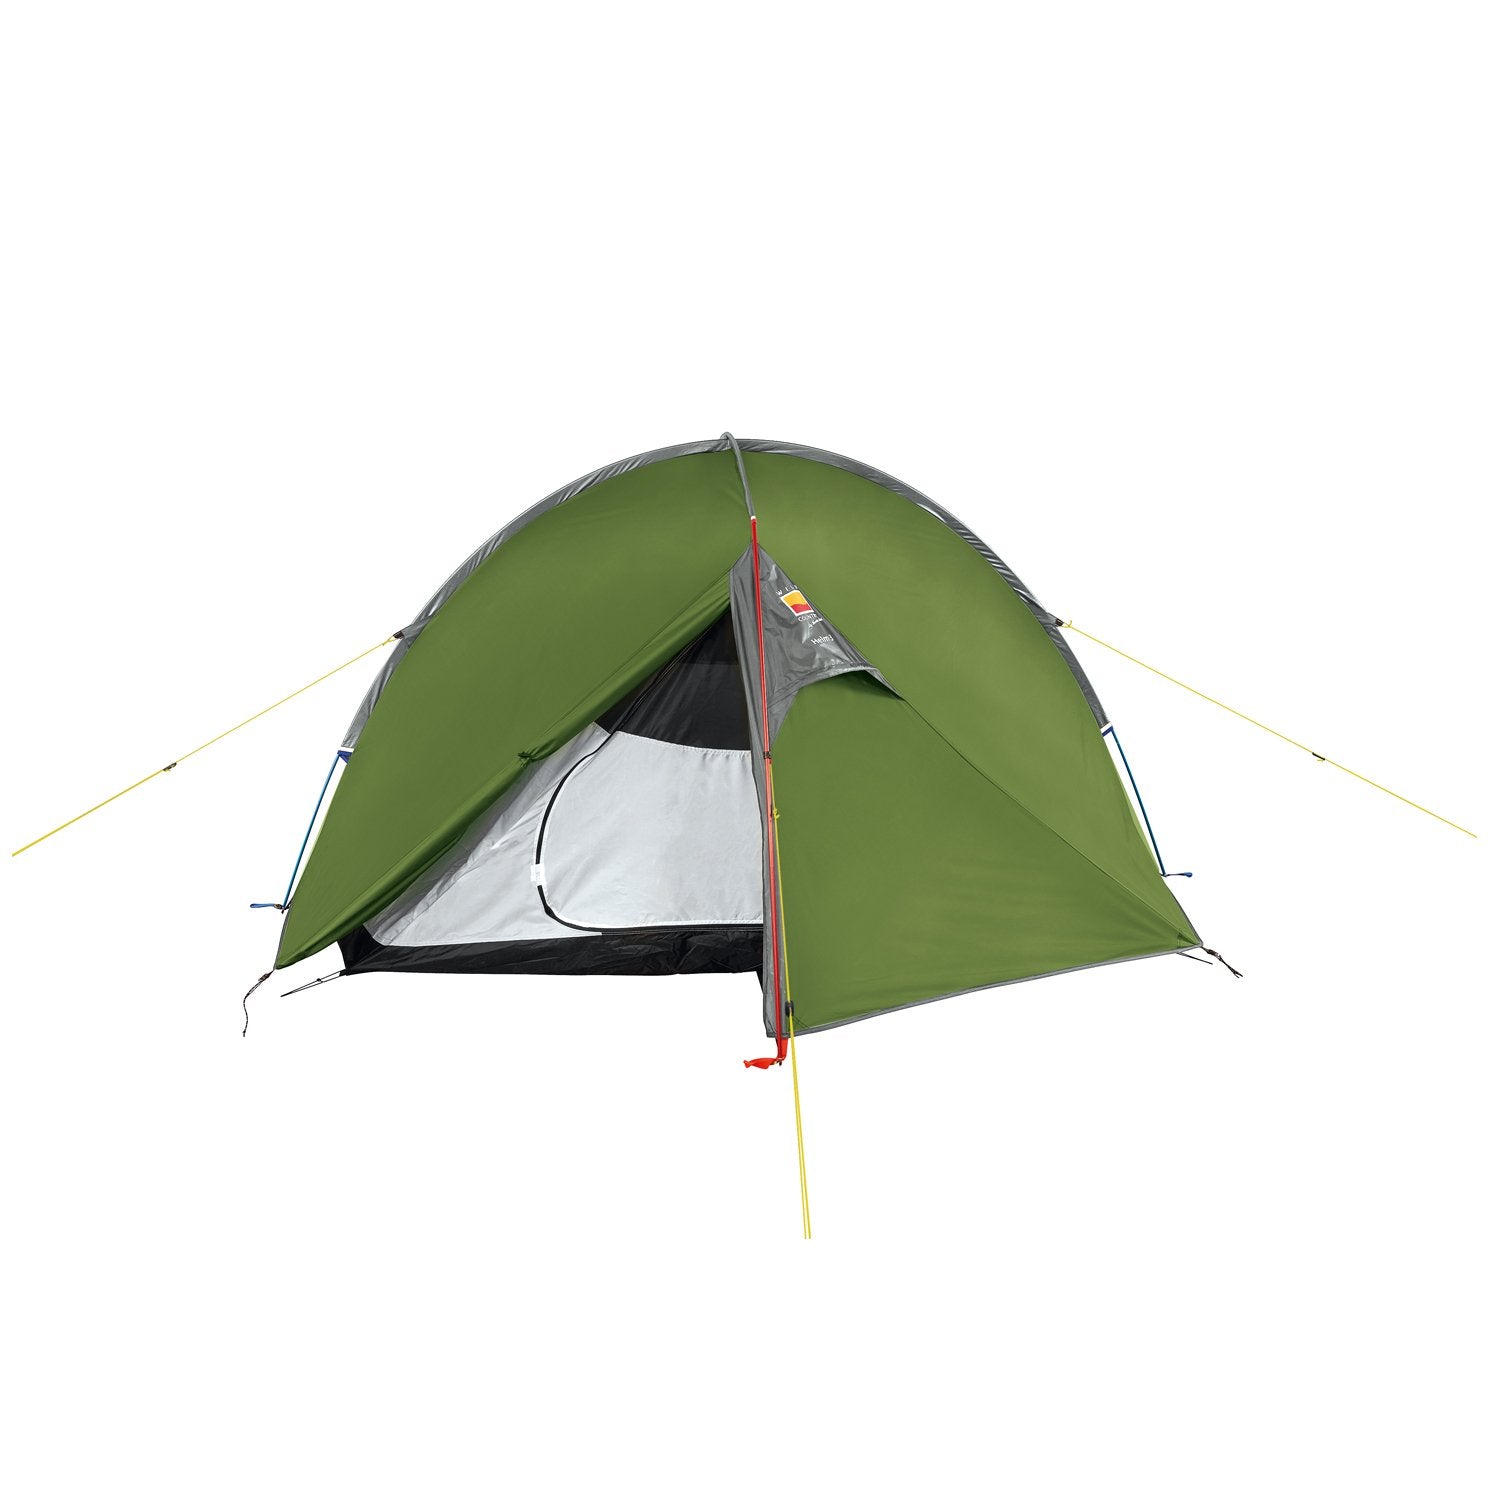 Wild Country Helm Compact 3 Tent - 3 Person Tent - 2020